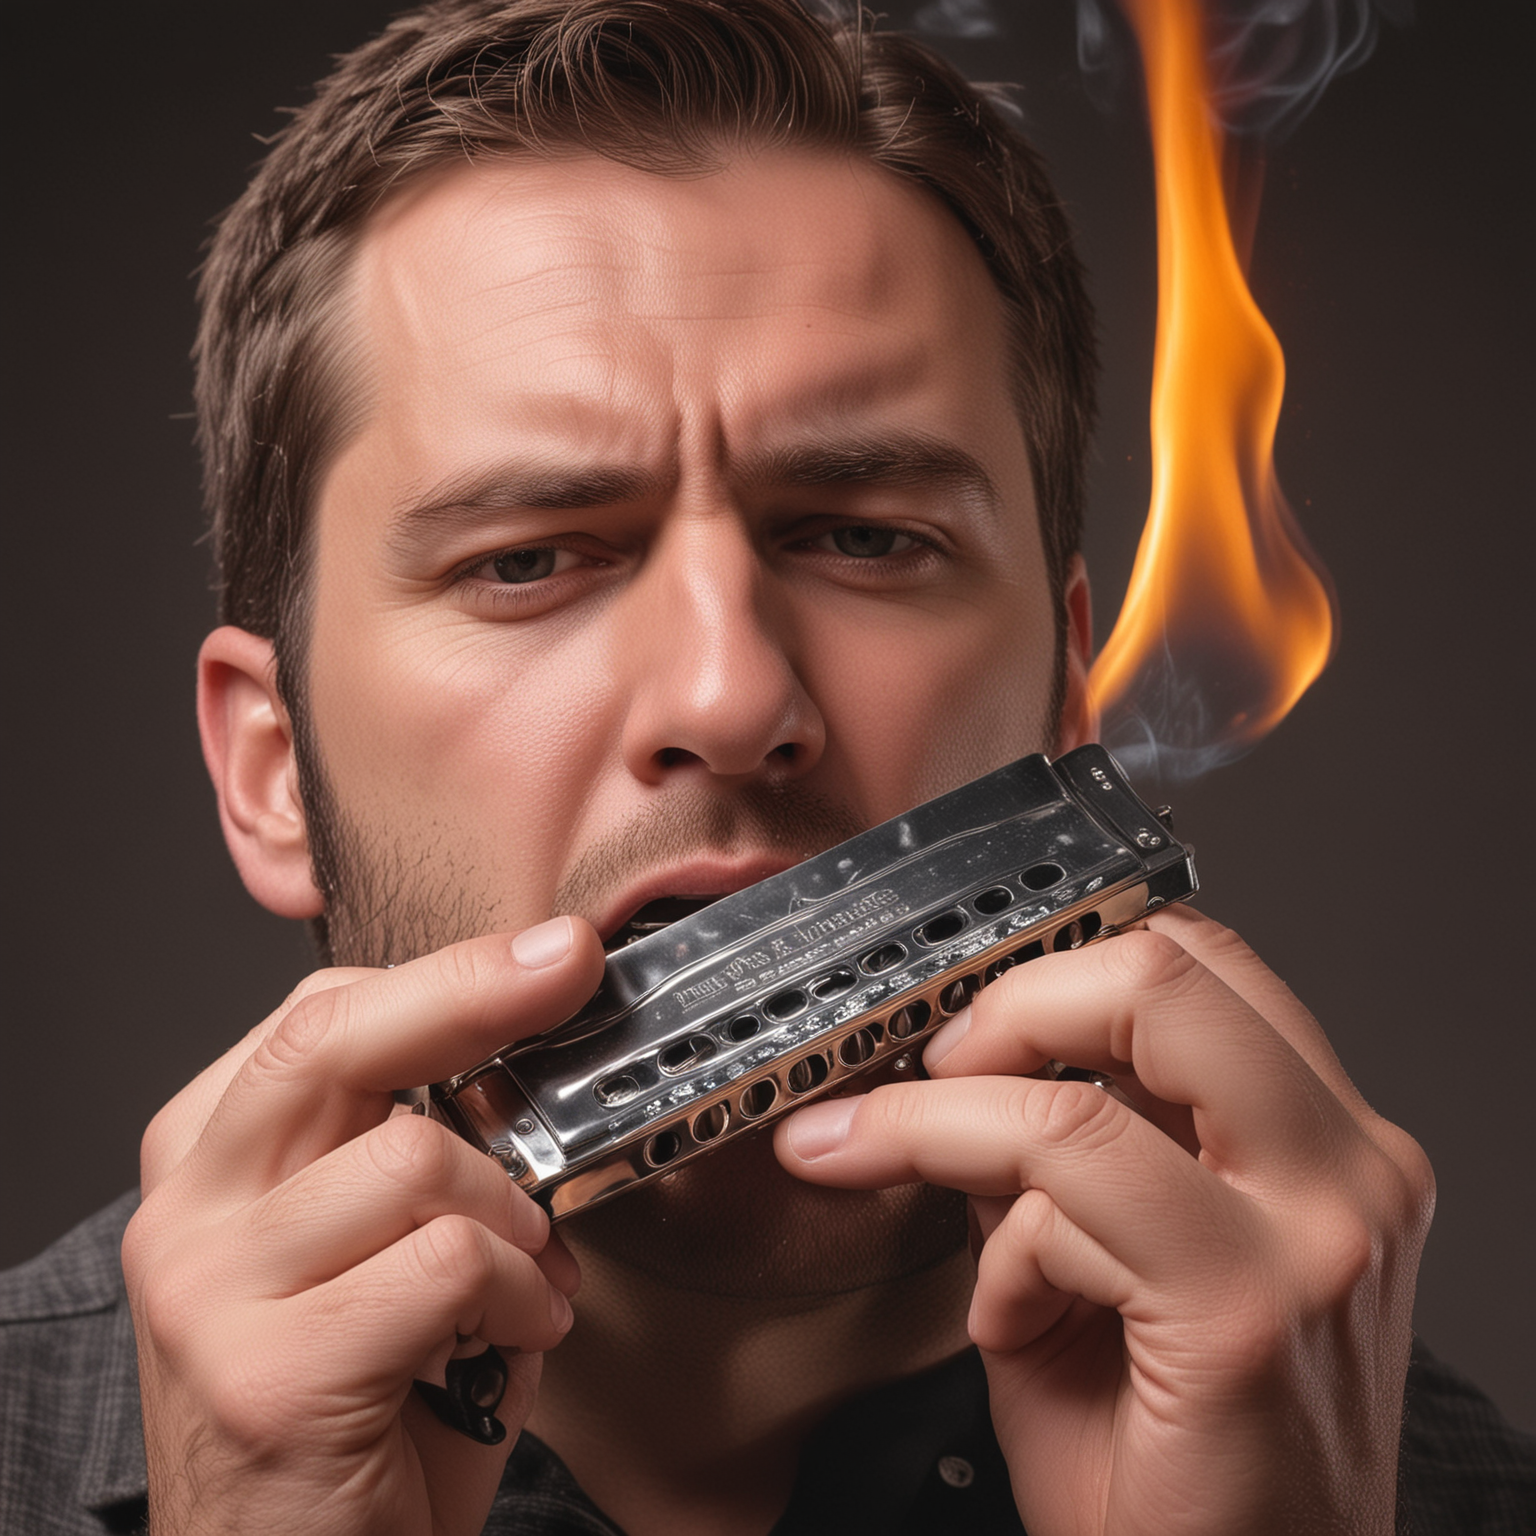 hand holding harmonica on fire next to his mouth